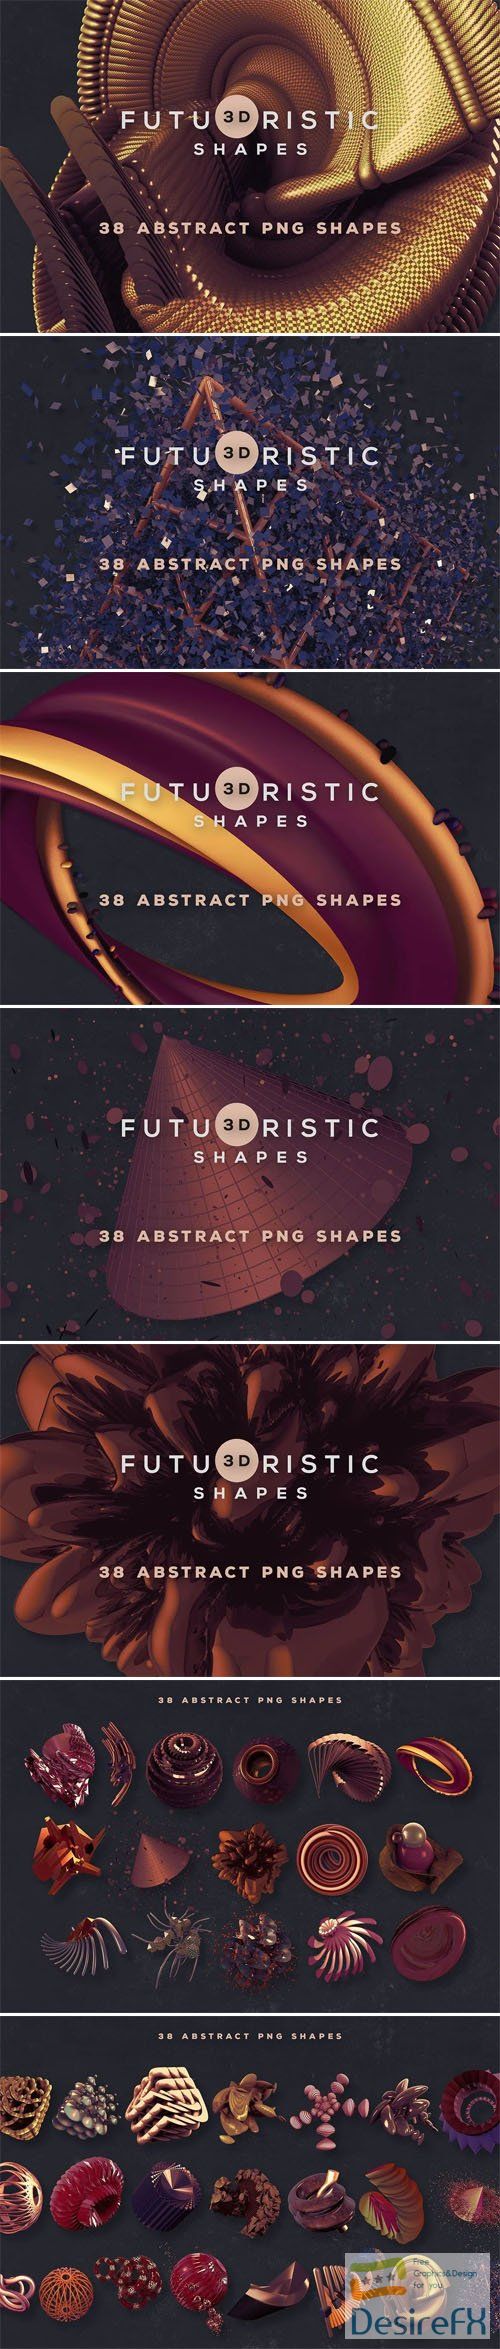 3D Creative Abstract Shapes Collection